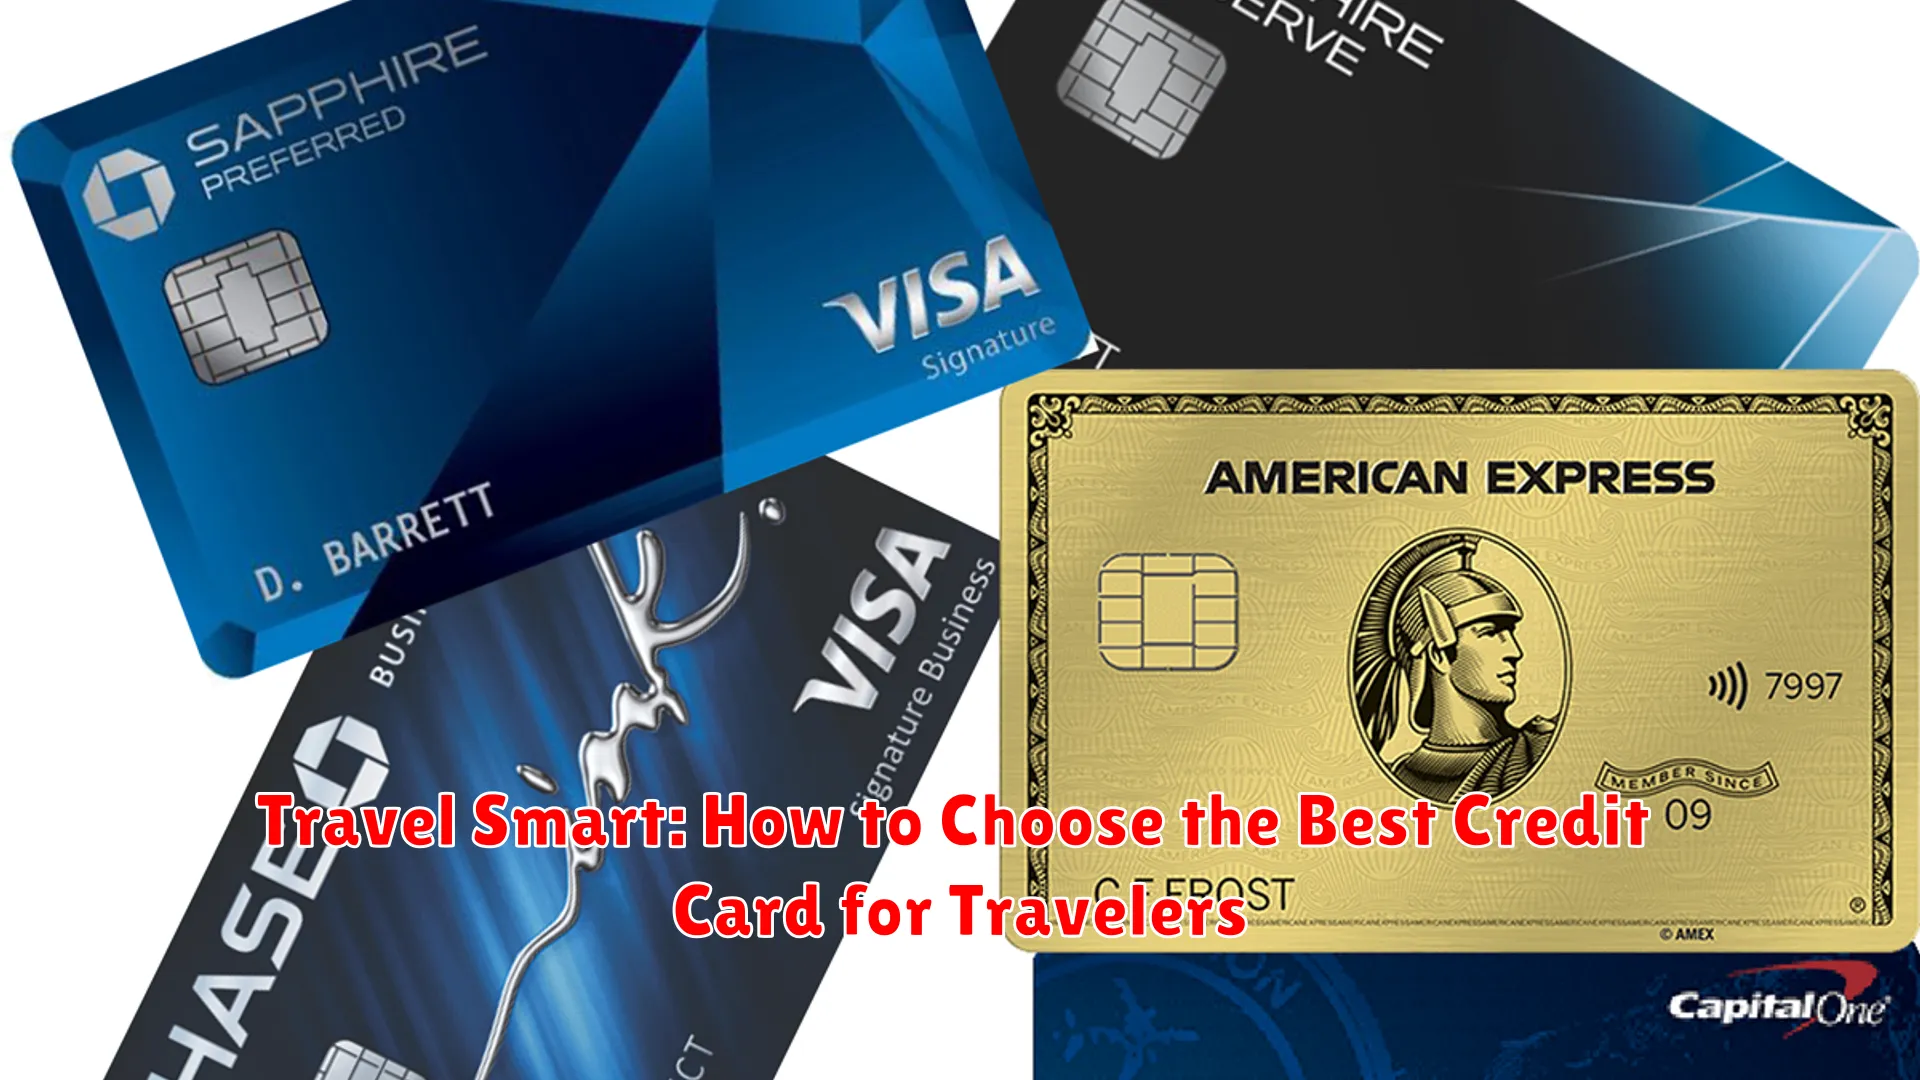 Travel Smart: How to Choose the Best Credit Card for Travelers